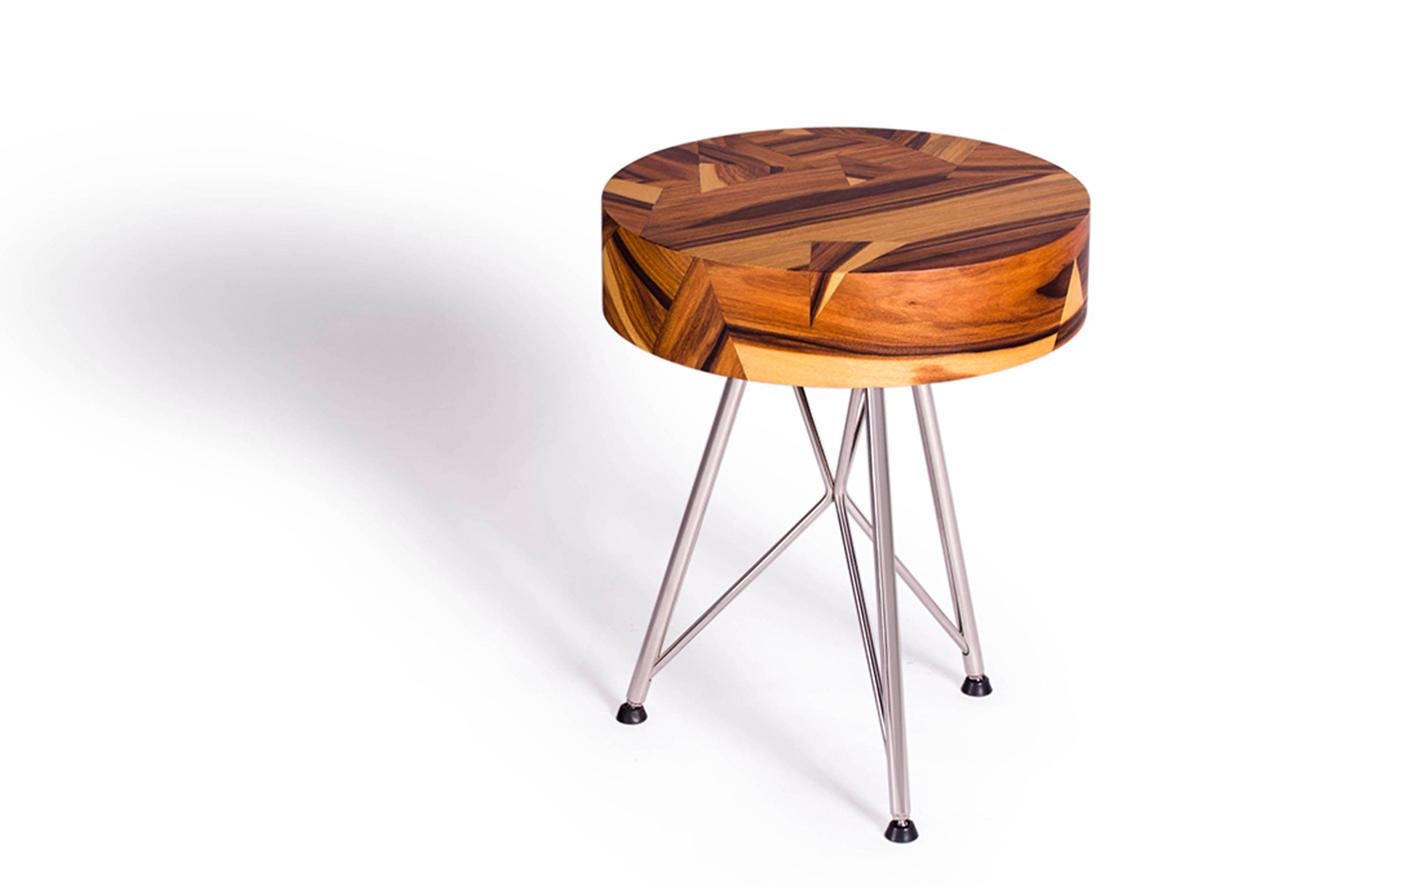 Stainless Steel Alma Geometric Contemporary Rosewood Stool or Auxiliary Table